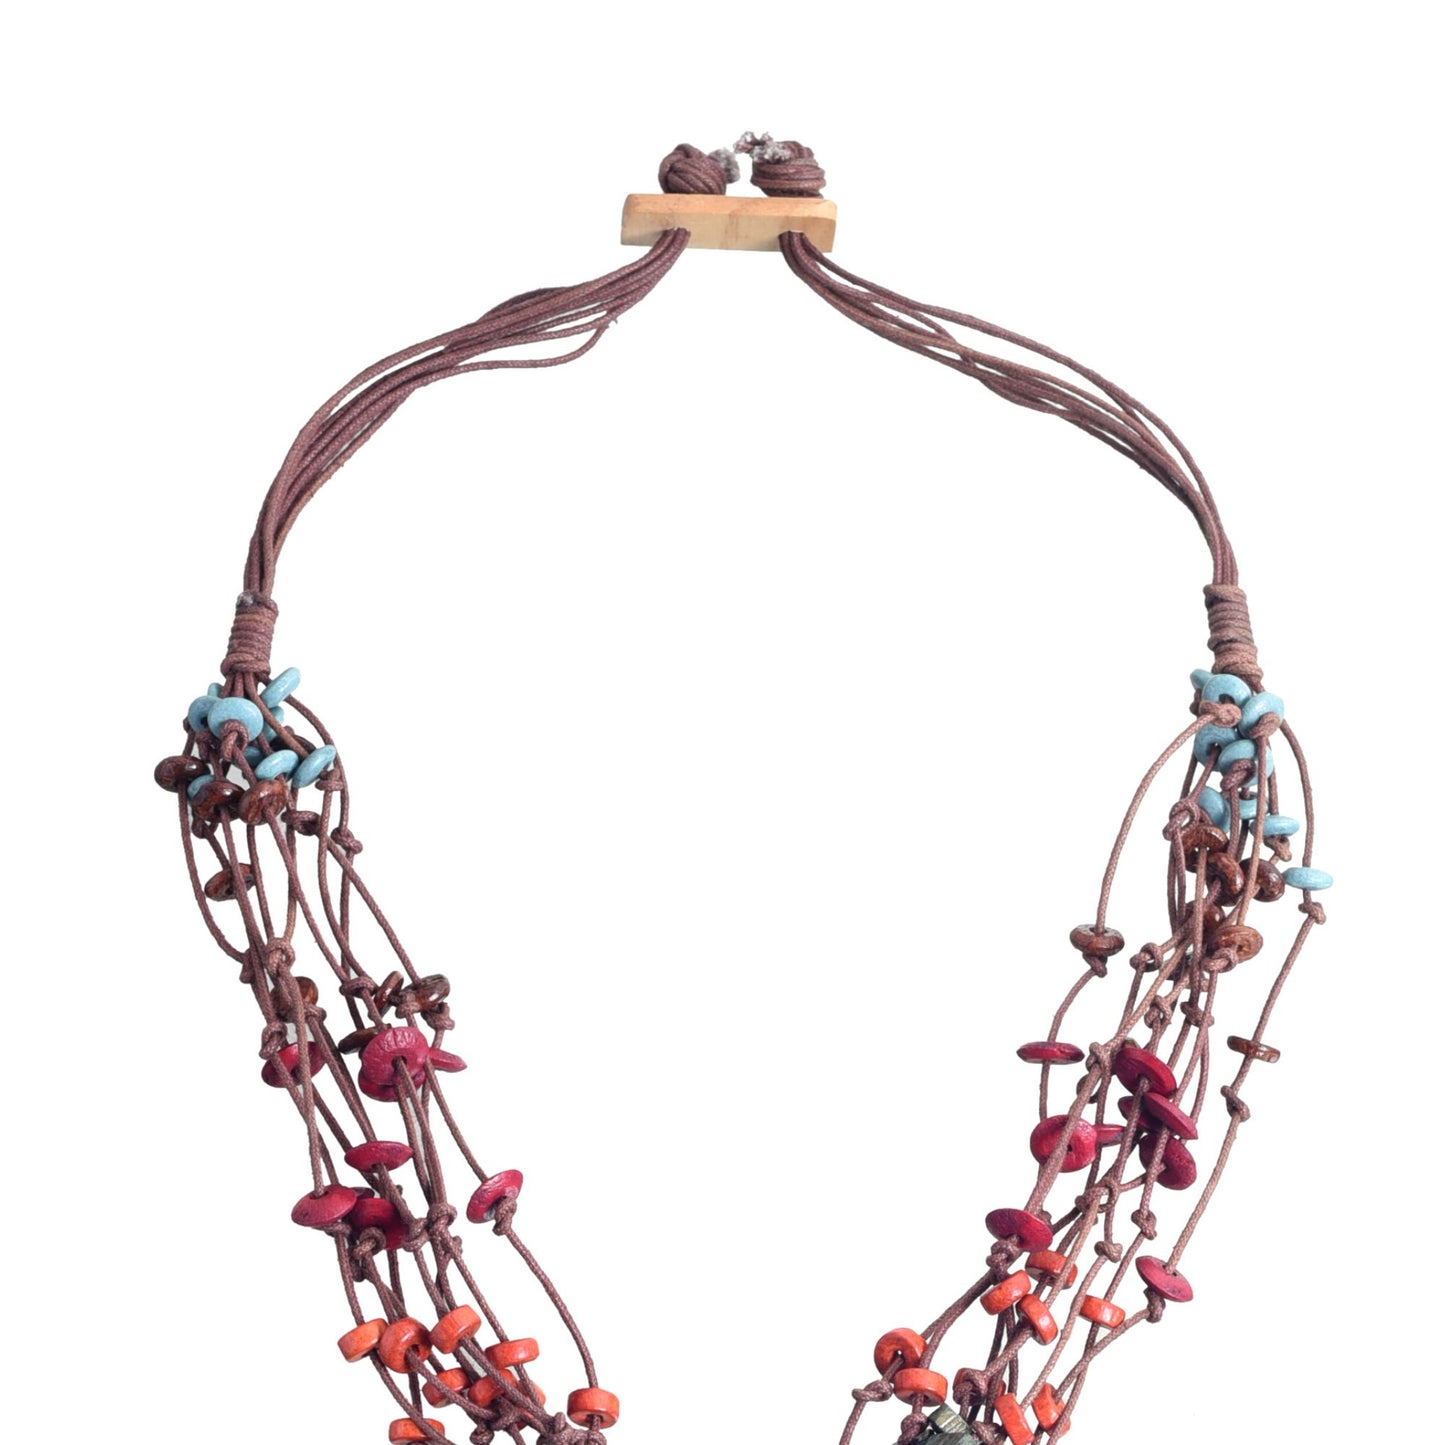 Controlled Chaos: Handcrafted Wooden Loop Necklace in Maroon